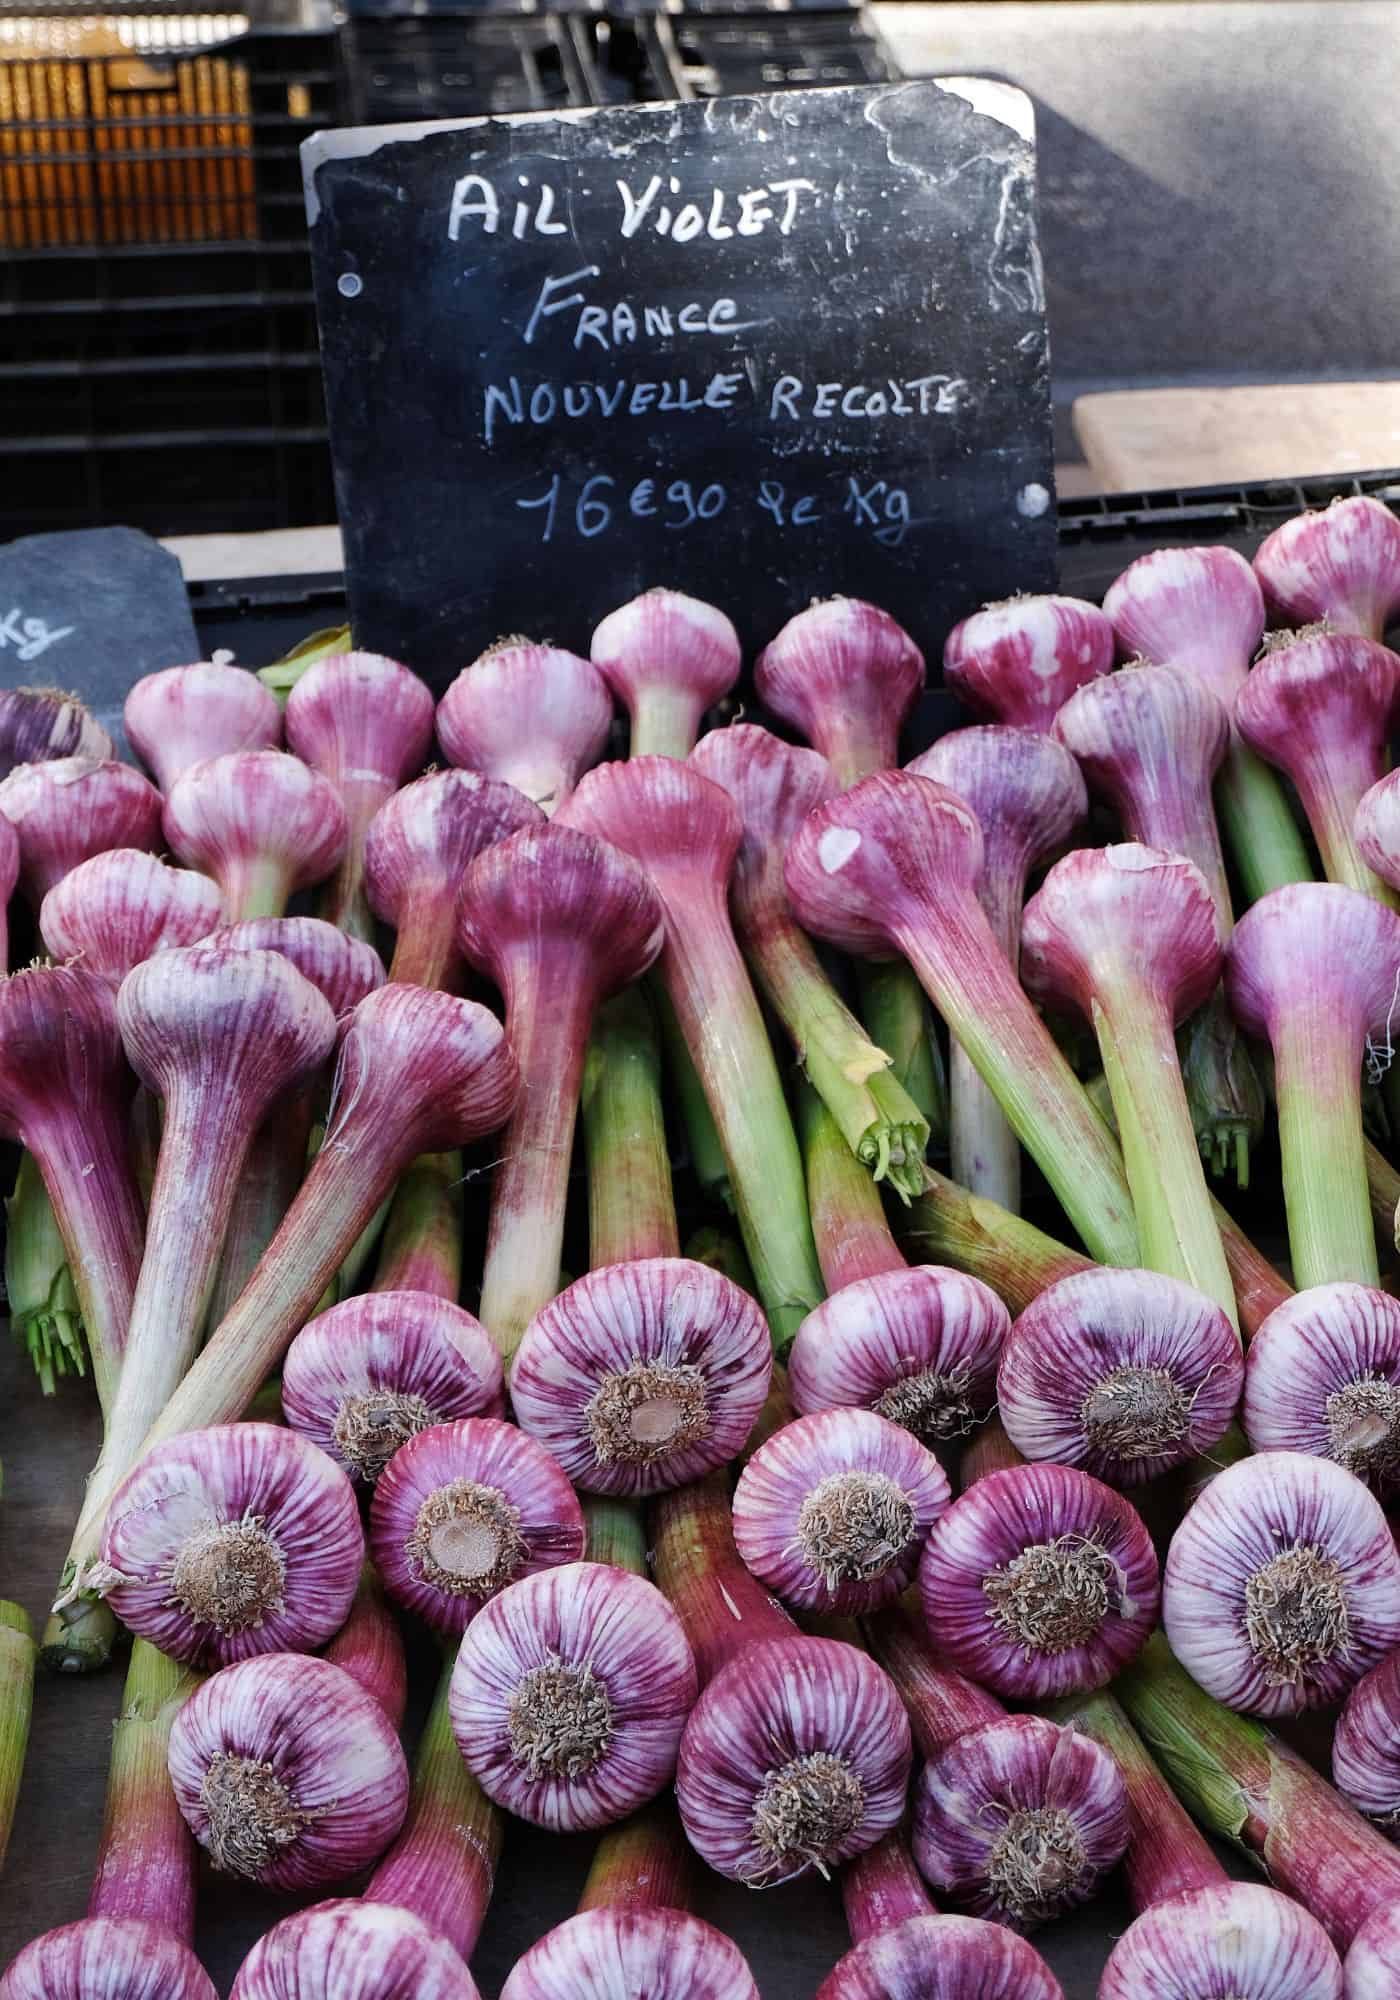 Purple garlic for sale at the market